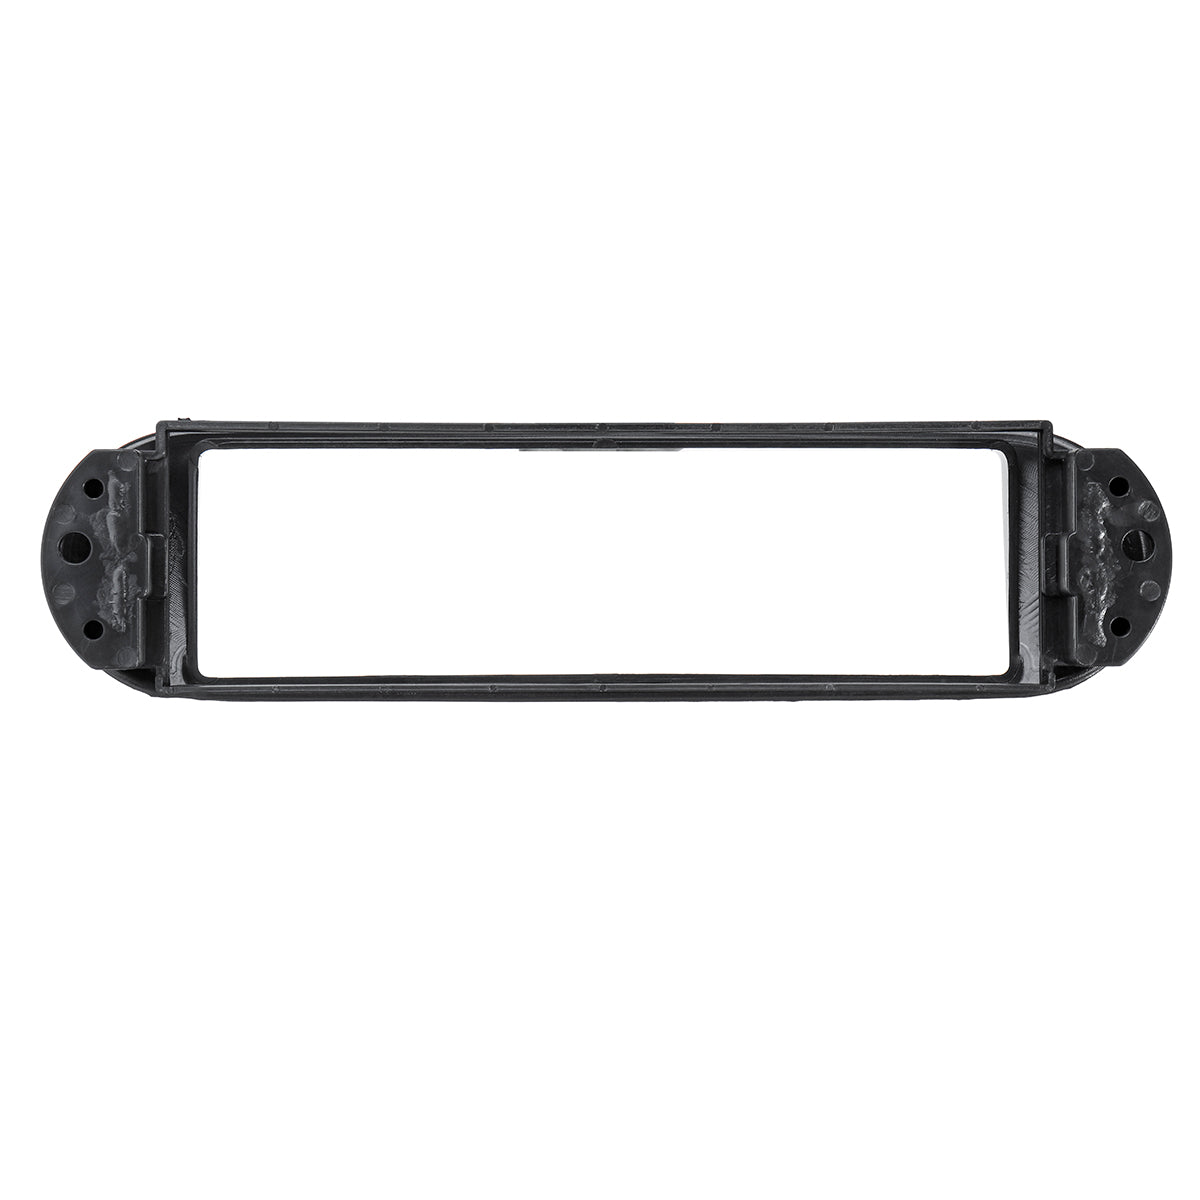 Car Audio CD Stereo Fascia Kit Adapter Plate For Beetle 1999-2010 - Auto GoShop